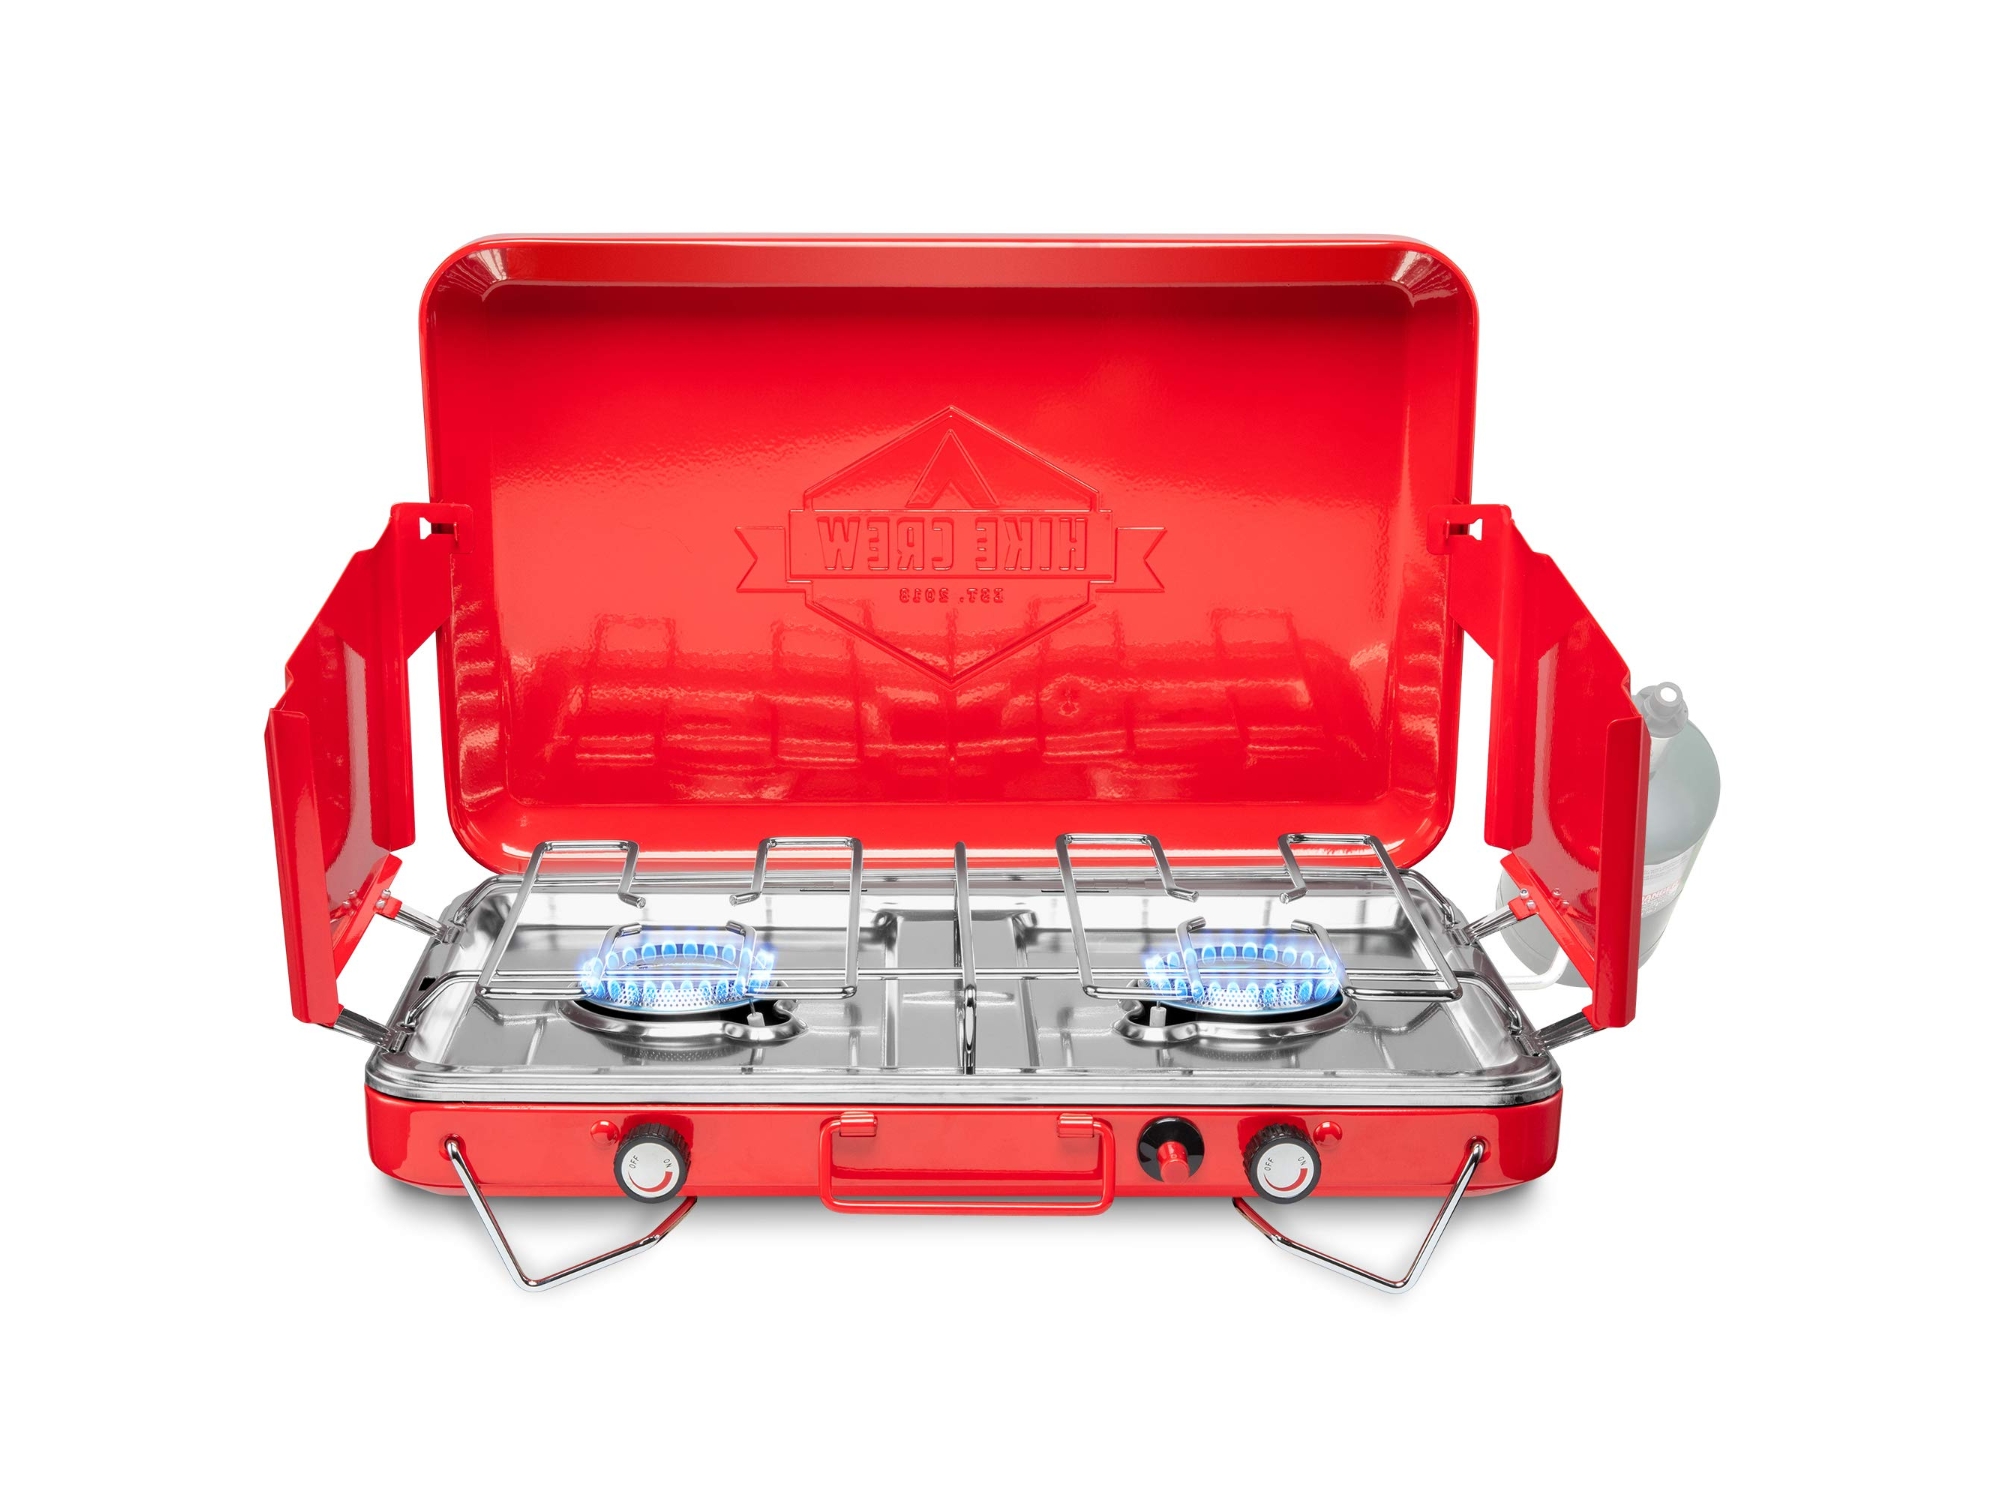 Image of Hike Crew Portable Dual Propane Burner Camping Stove with Igniter Red ID 843812140683